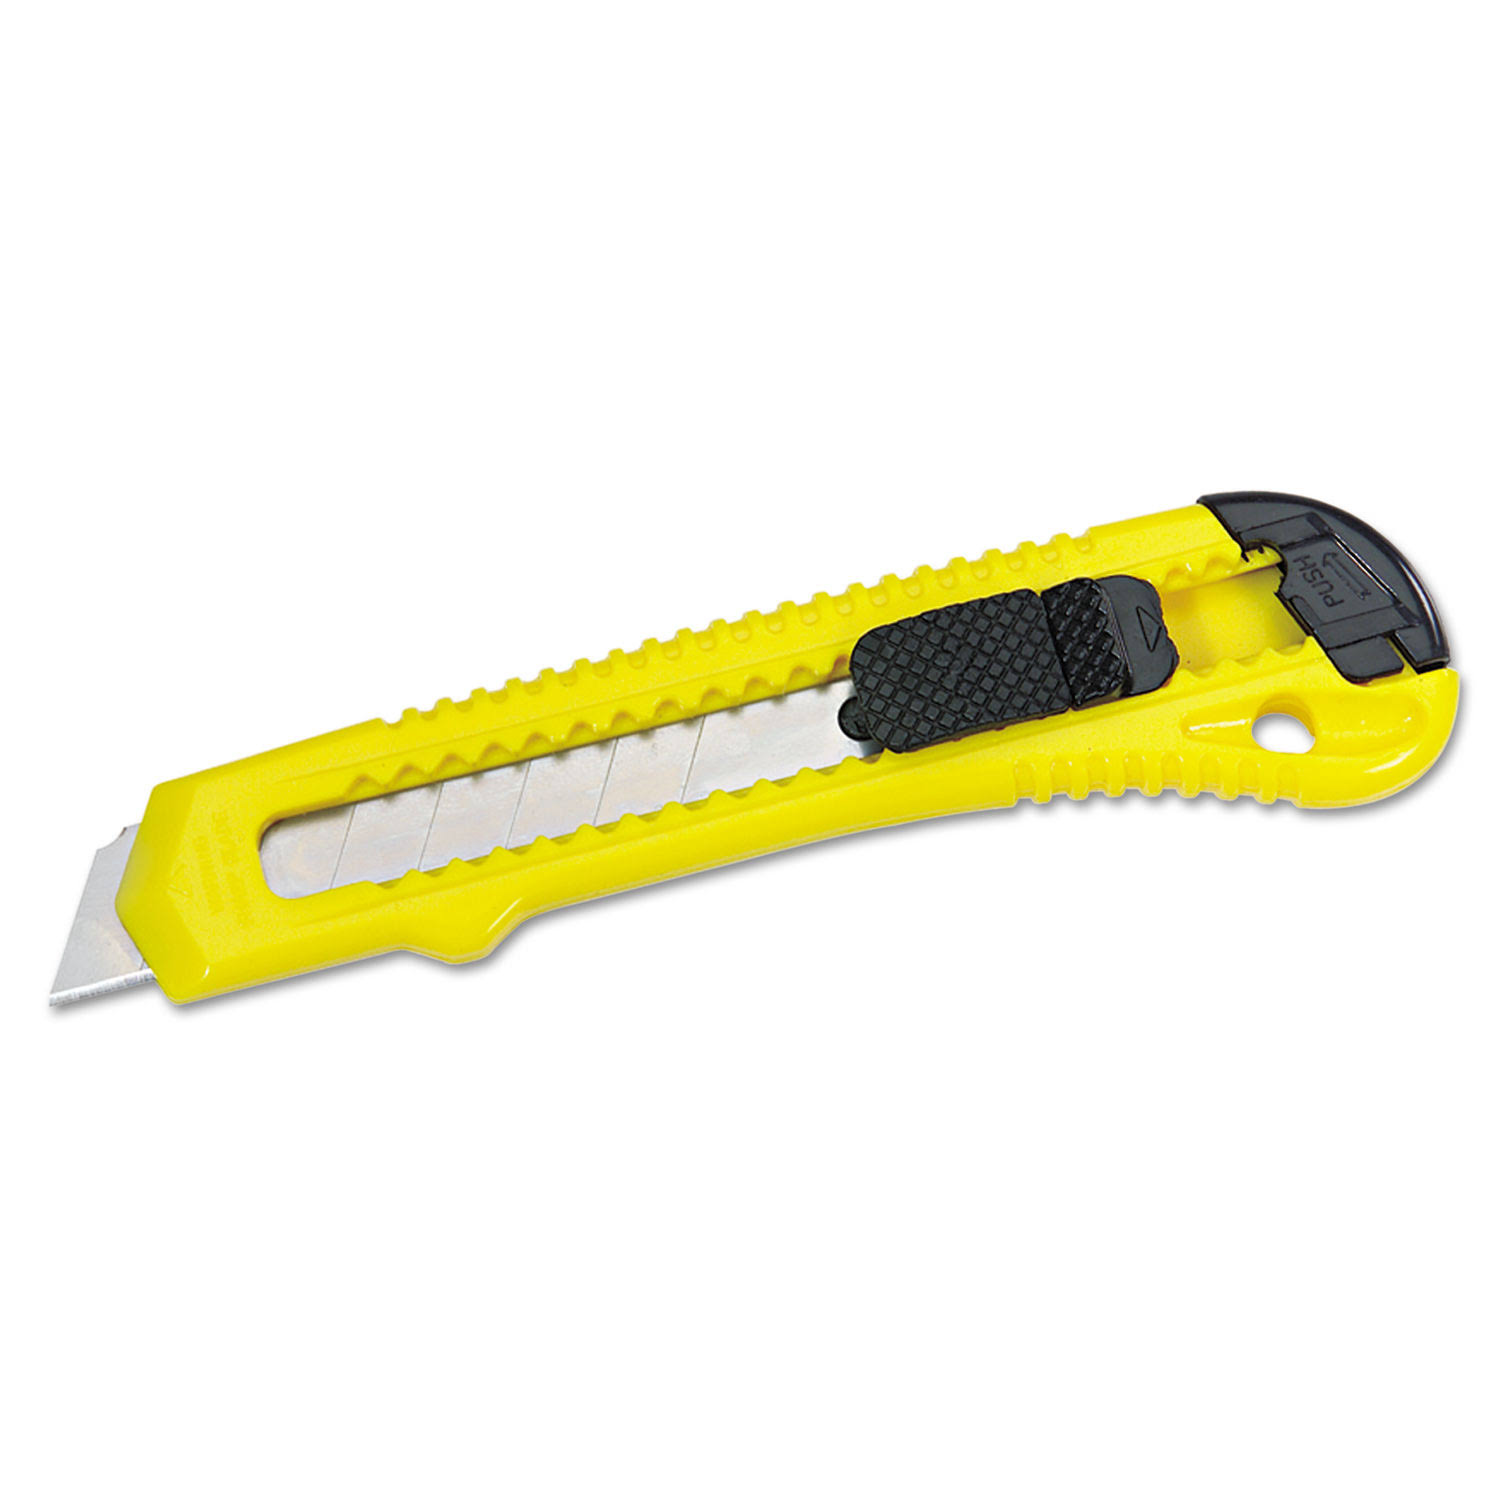 Stanley Tools Snap-Off Retractable Pocket Utility Knife - Yellow & Black